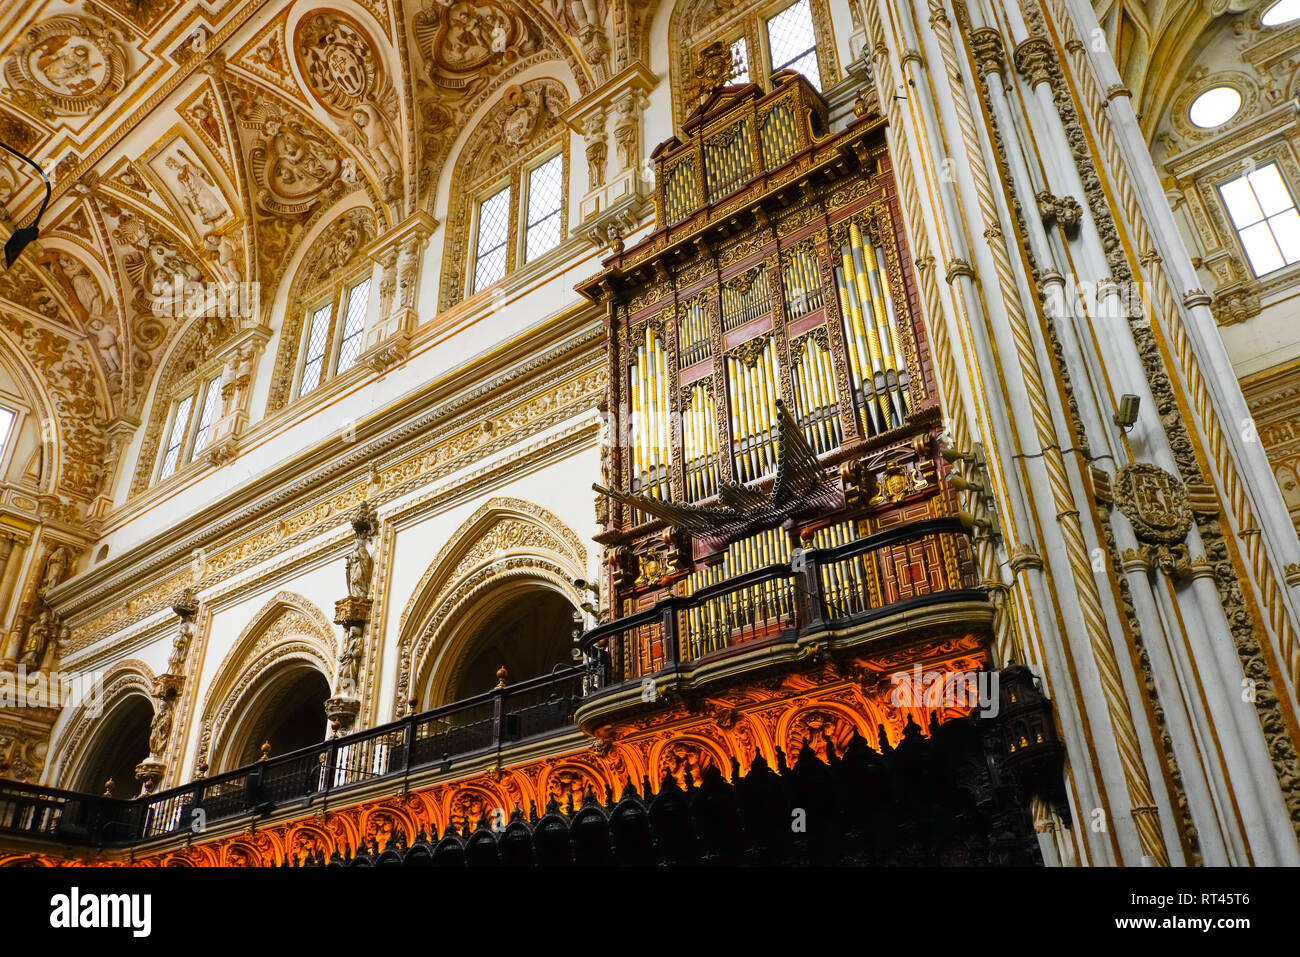 Impressive Great Organ in The Cathedral of Córdoba, Spain. Stock Photo